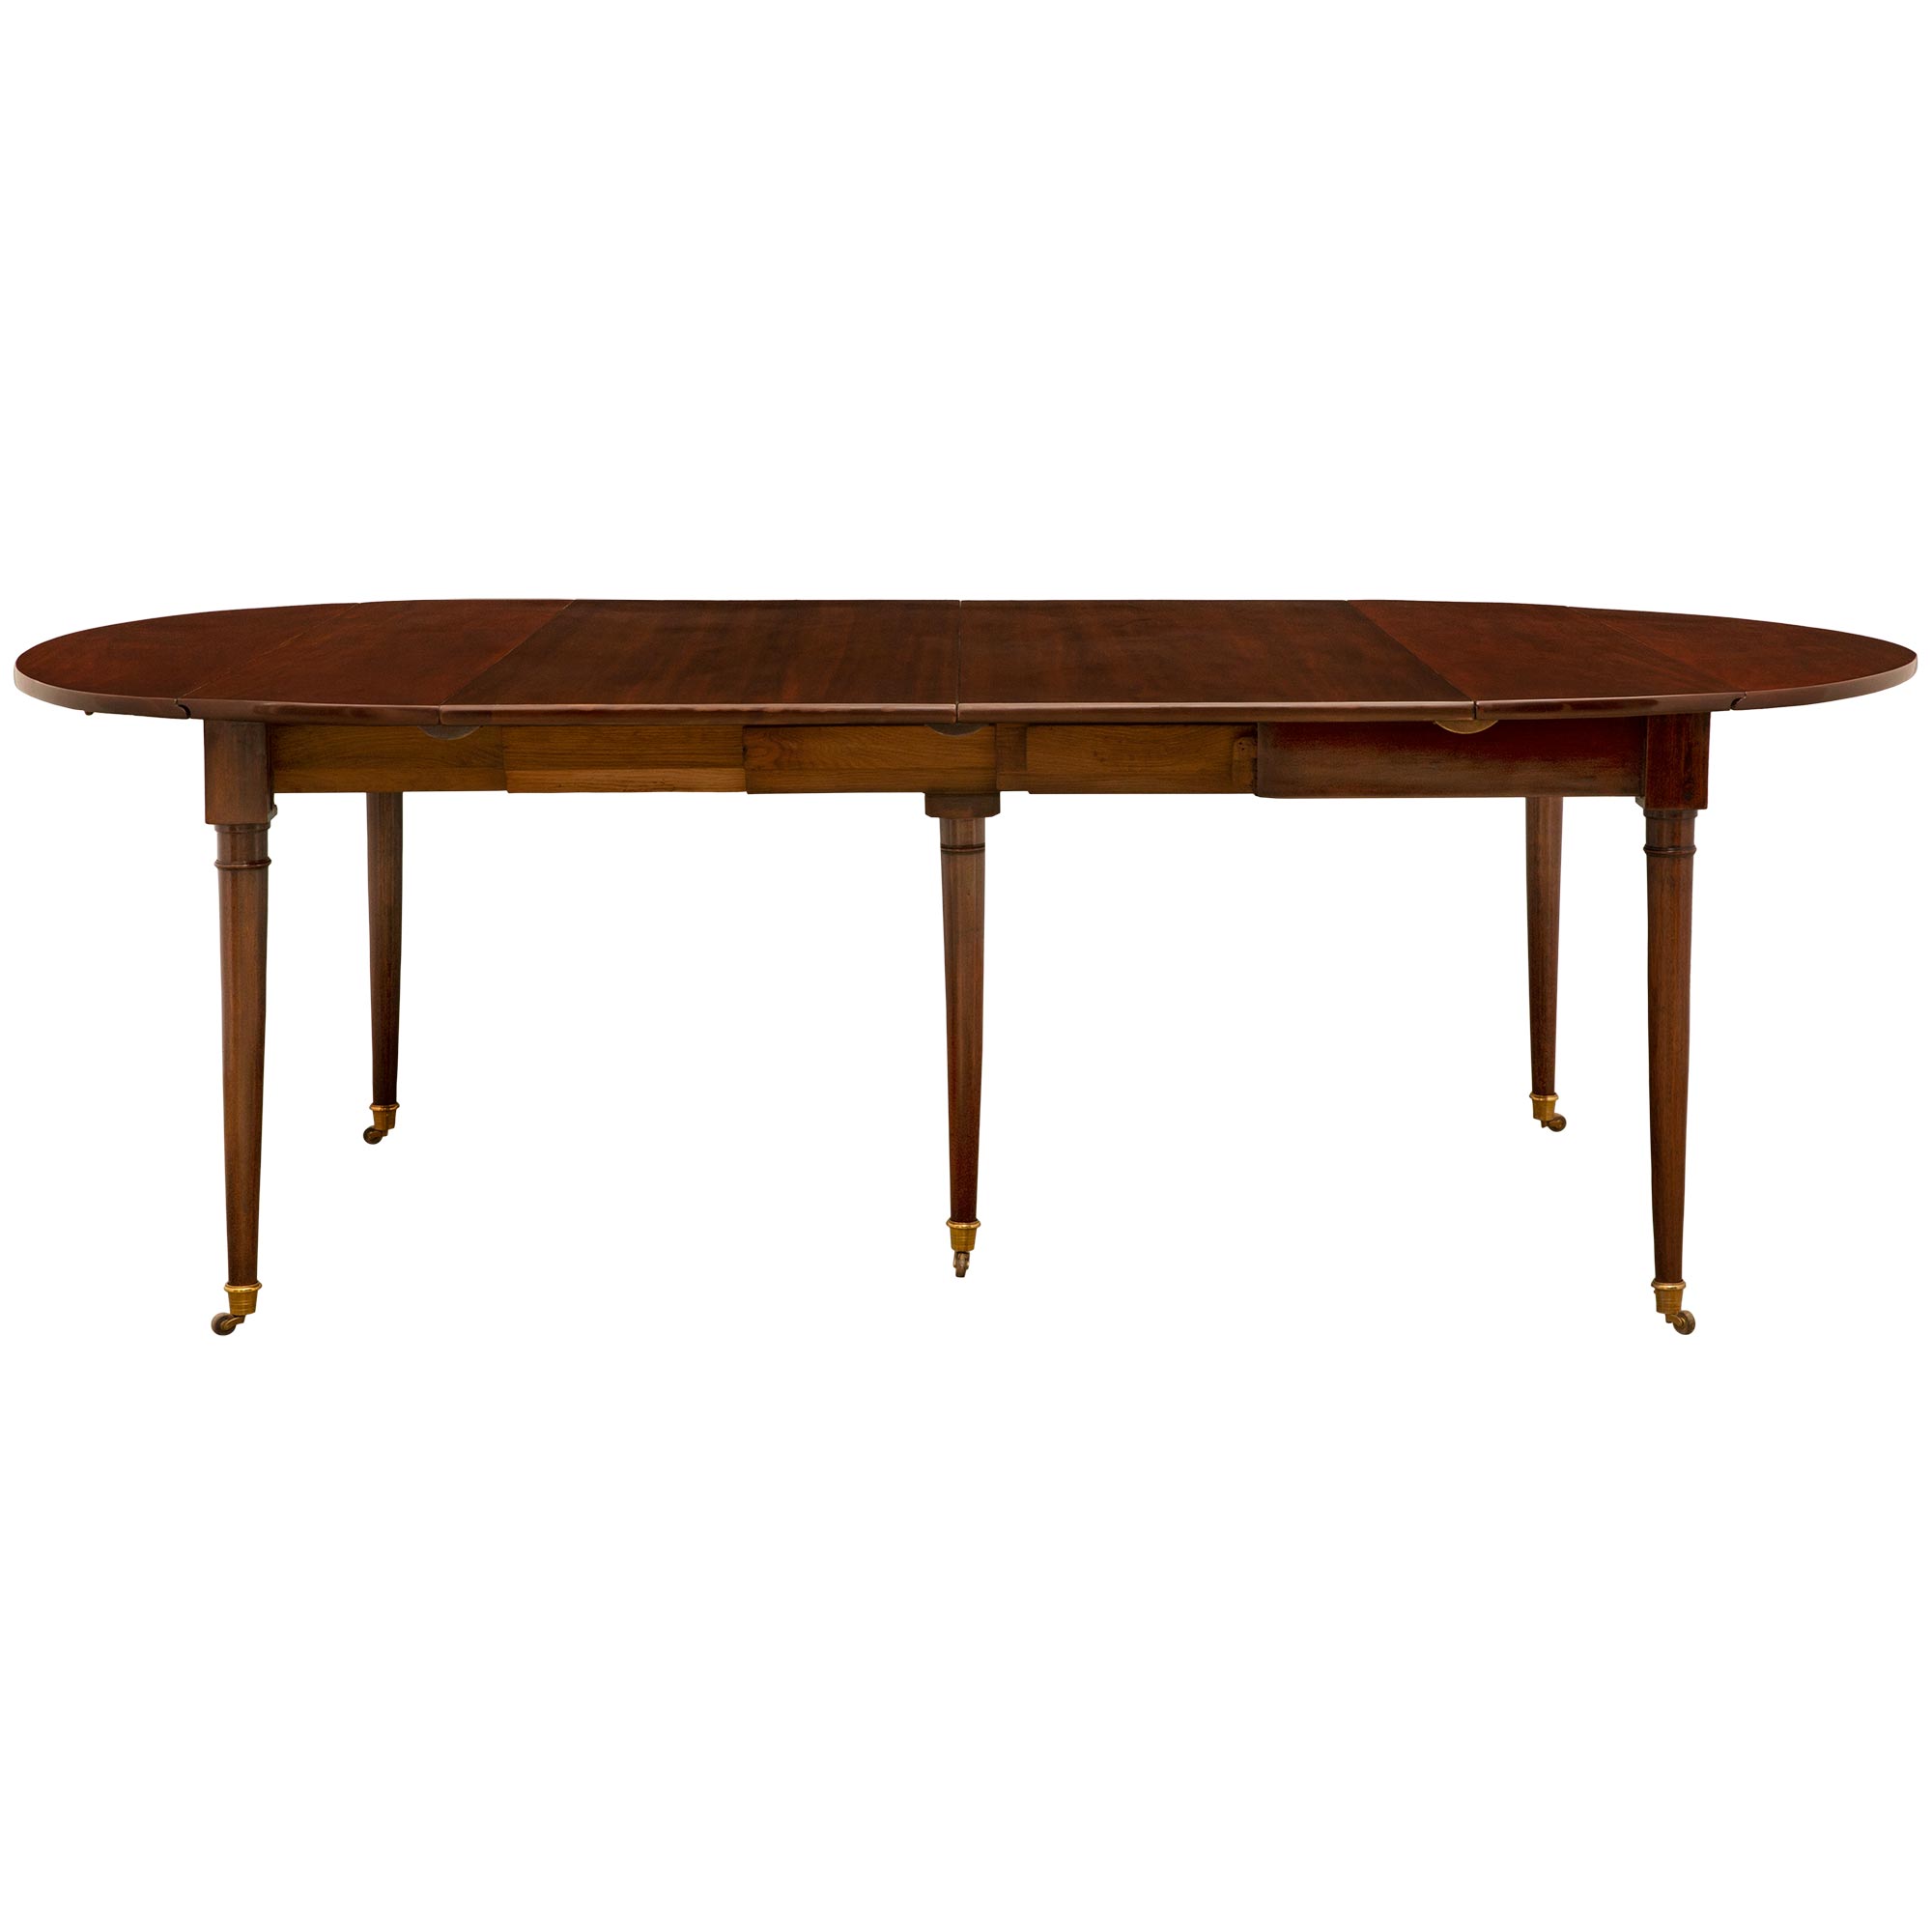 Early 19th Century French Louis XVI Style Mahogany Drop-Leaf Dining Table For Sale